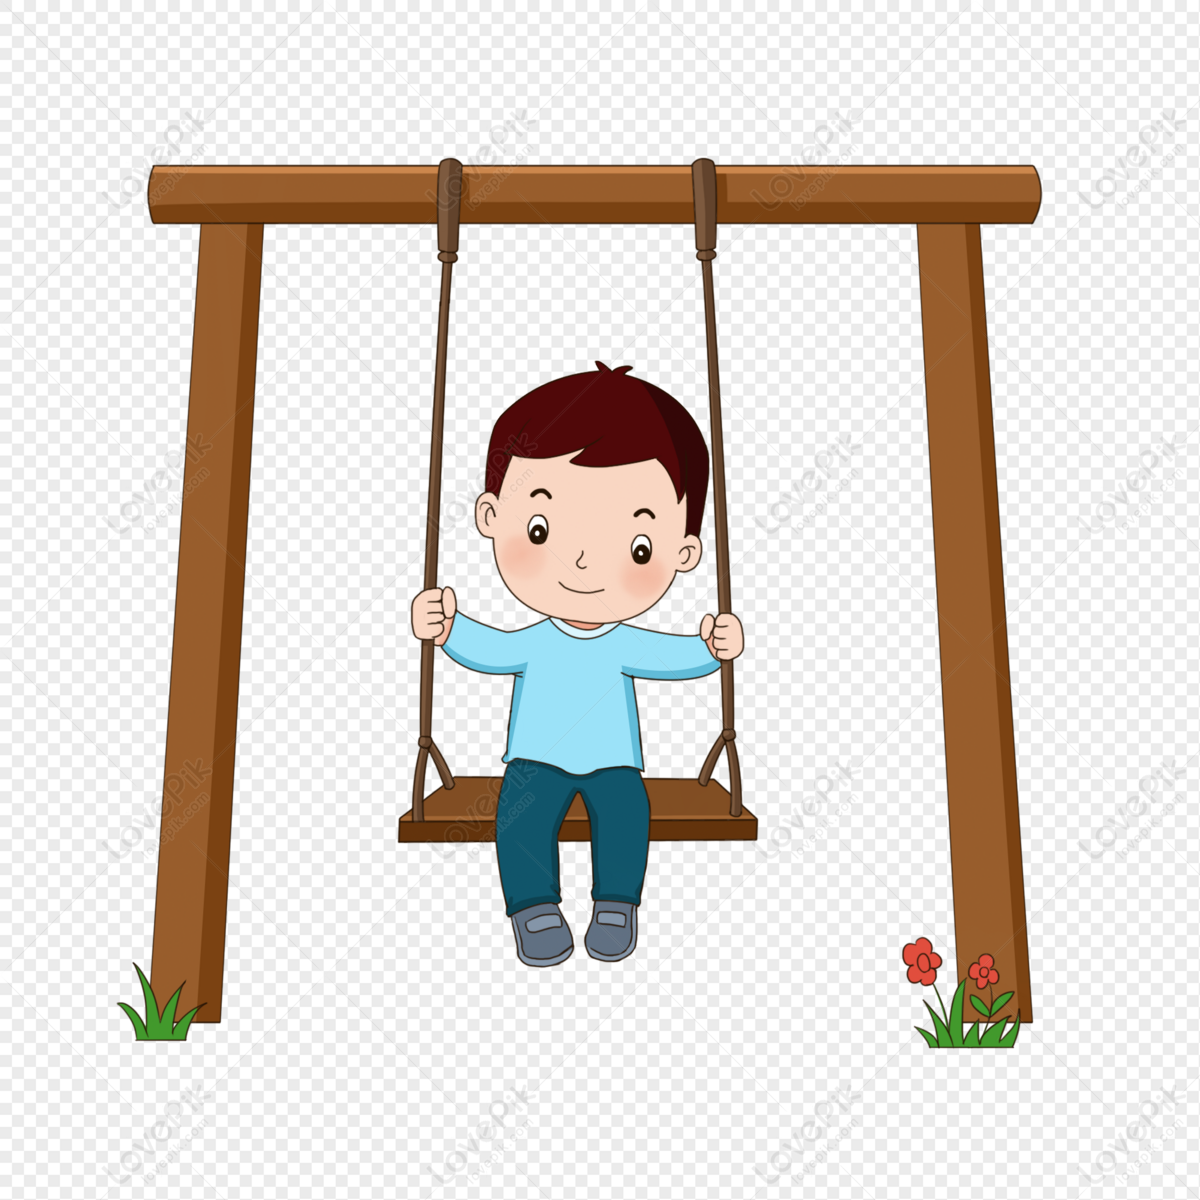 Swing Boy Cartoon Elements PNG Transparent Image And Clipart Image For Free  Download - Lovepik | 401686497